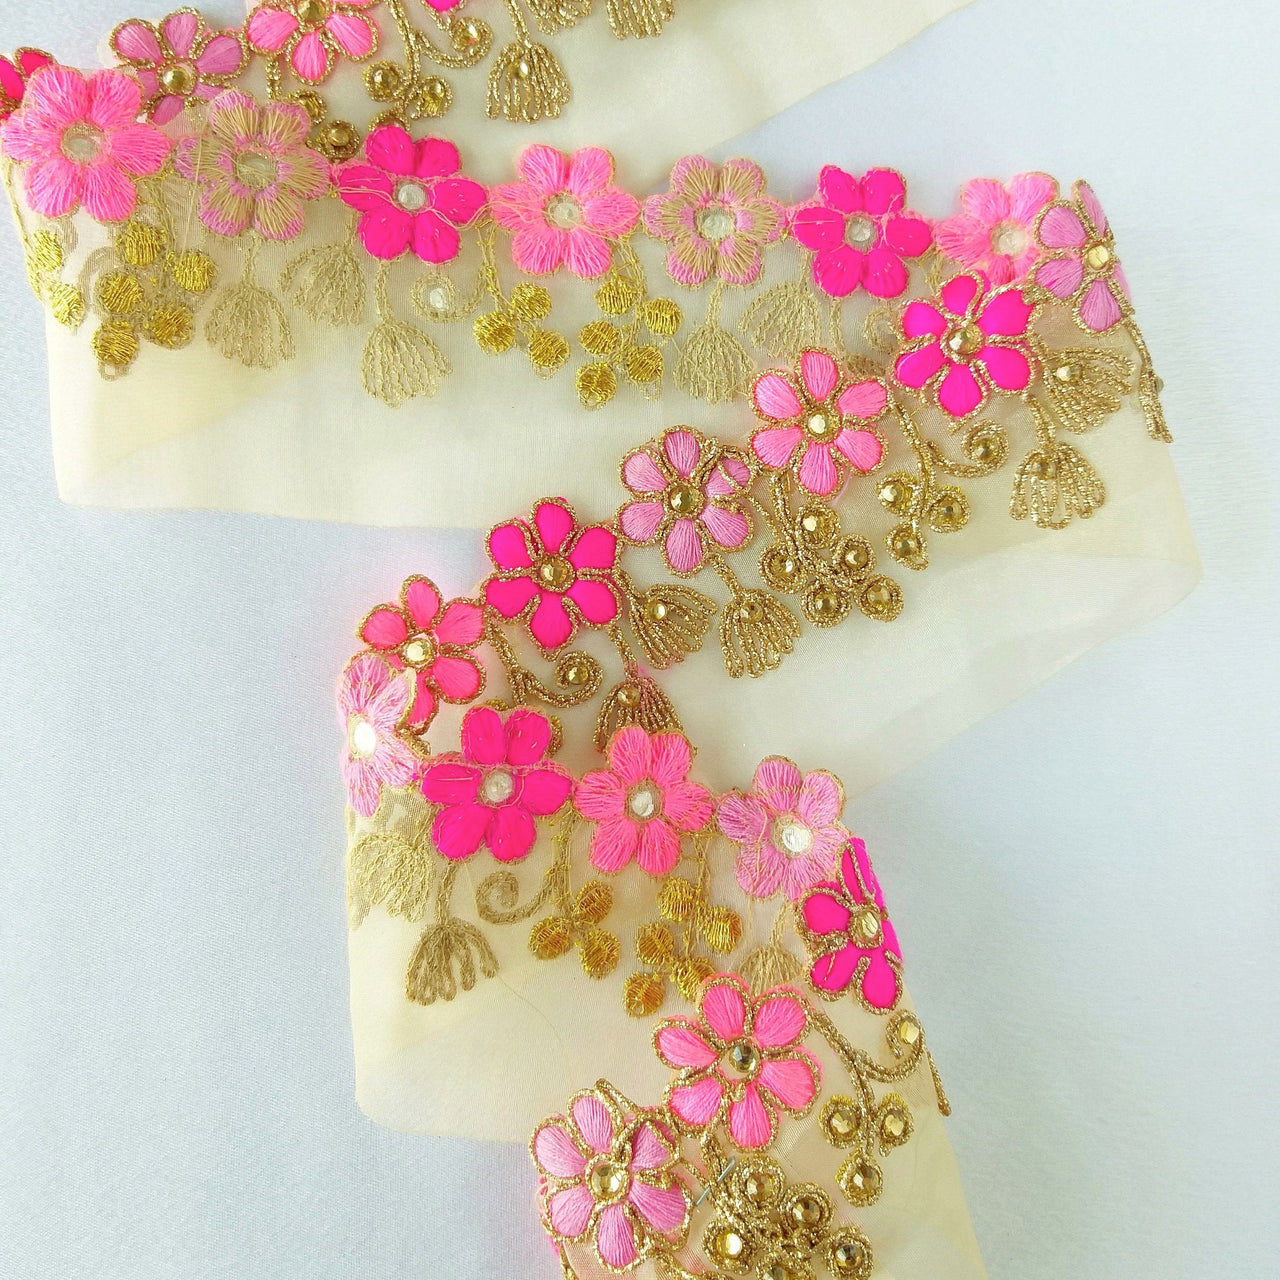 Gold Sheer Tissue Fabric Trim With Embroidered Pink & Gold Flowers, Embellished With Beads, Approx. 65 mm Wide - 210119L102